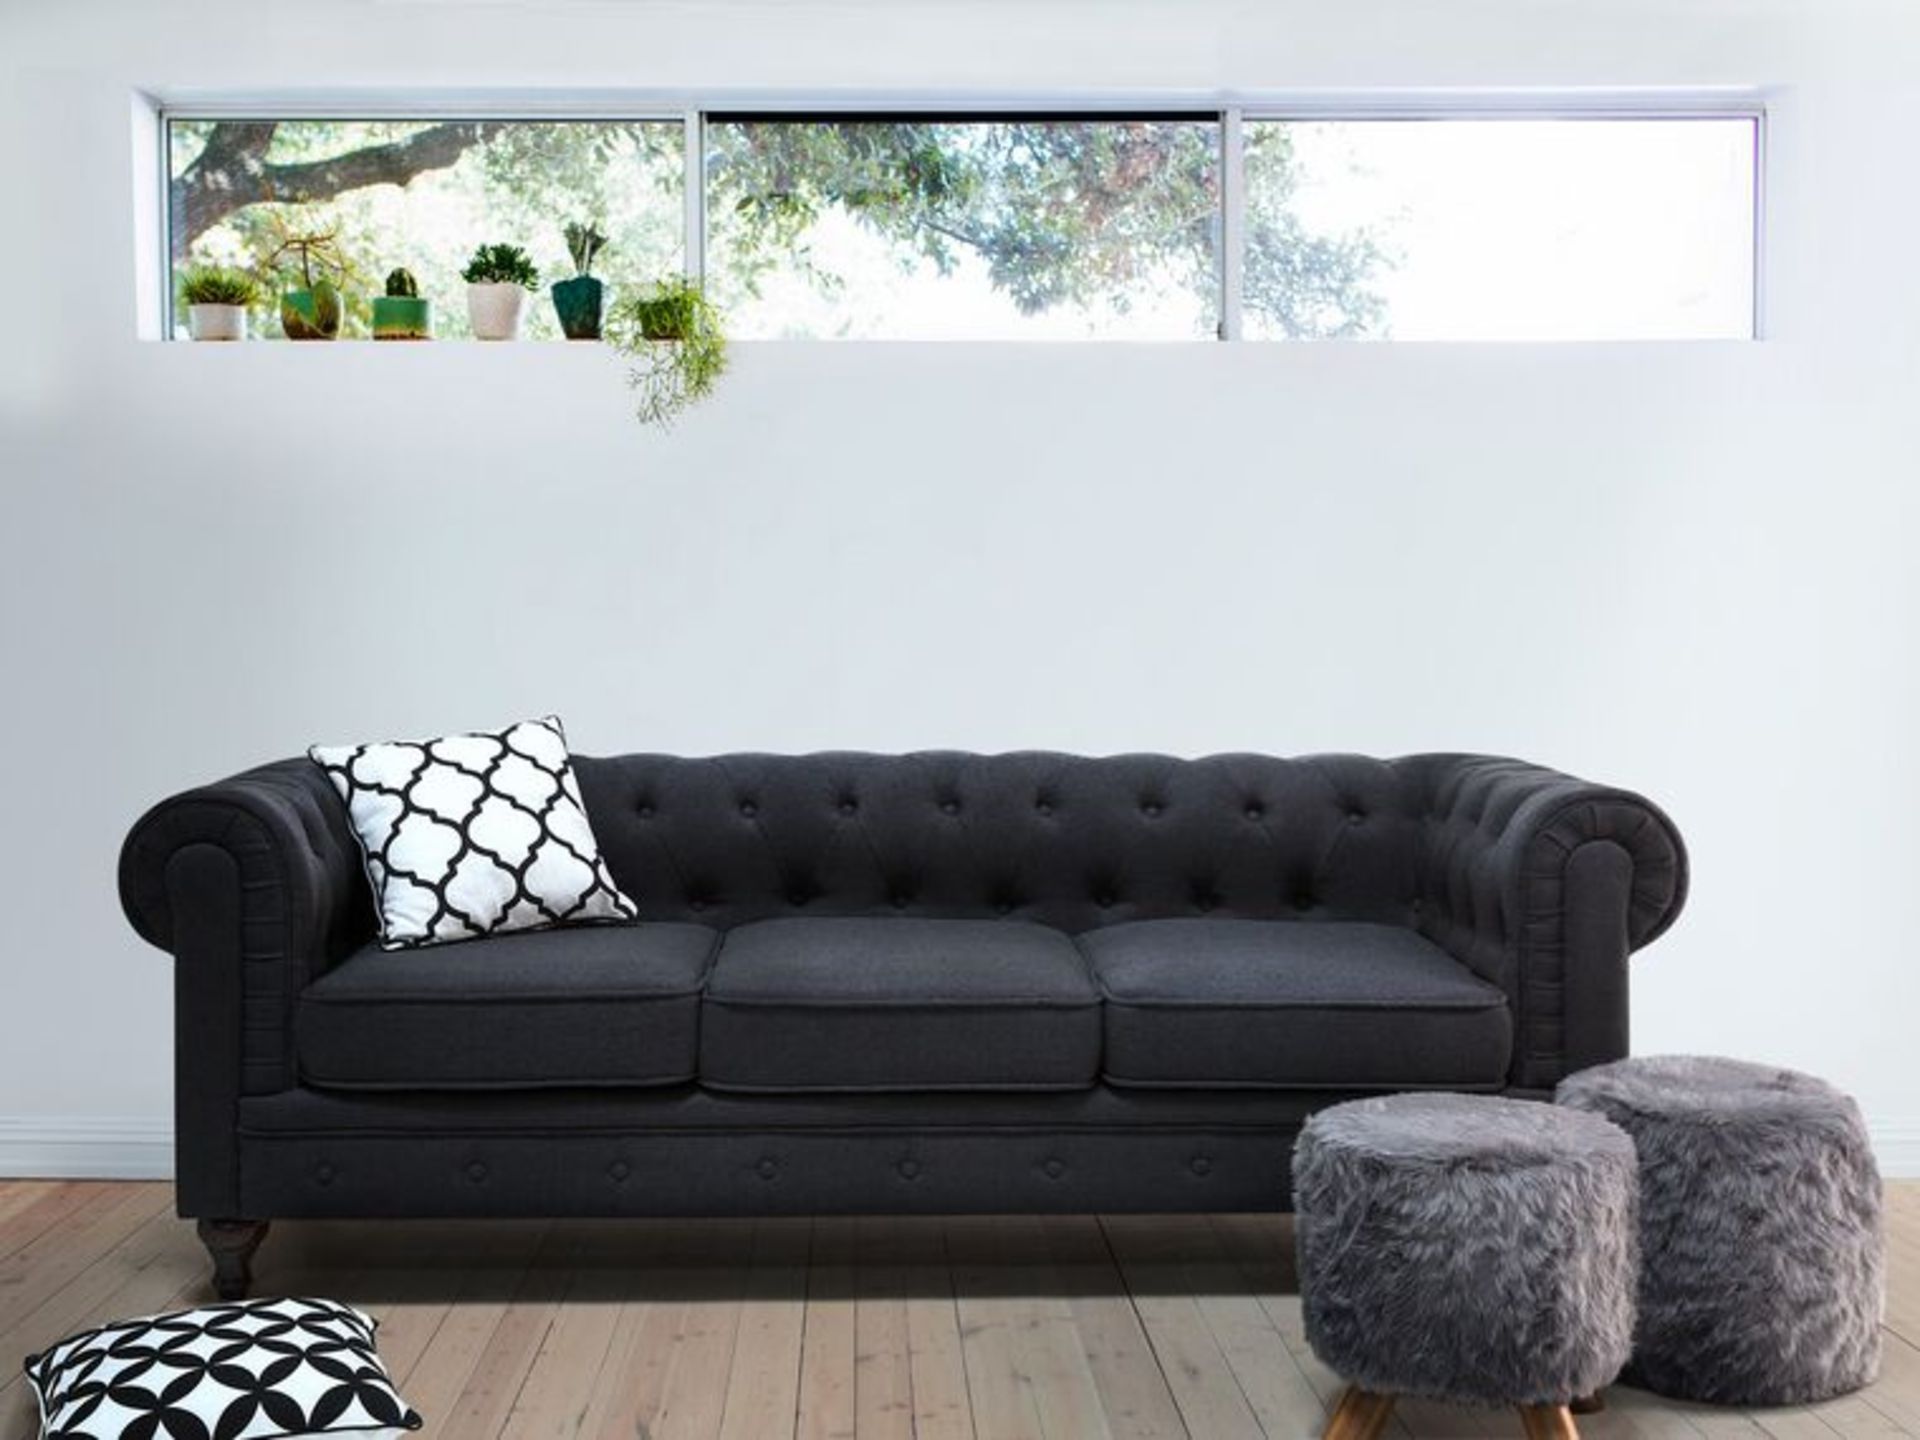 Chesterfield 3 Seater Fabric Sofa Graphite Grey. - SR6. RRP £819.99. This sofa with classic - Image 2 of 2